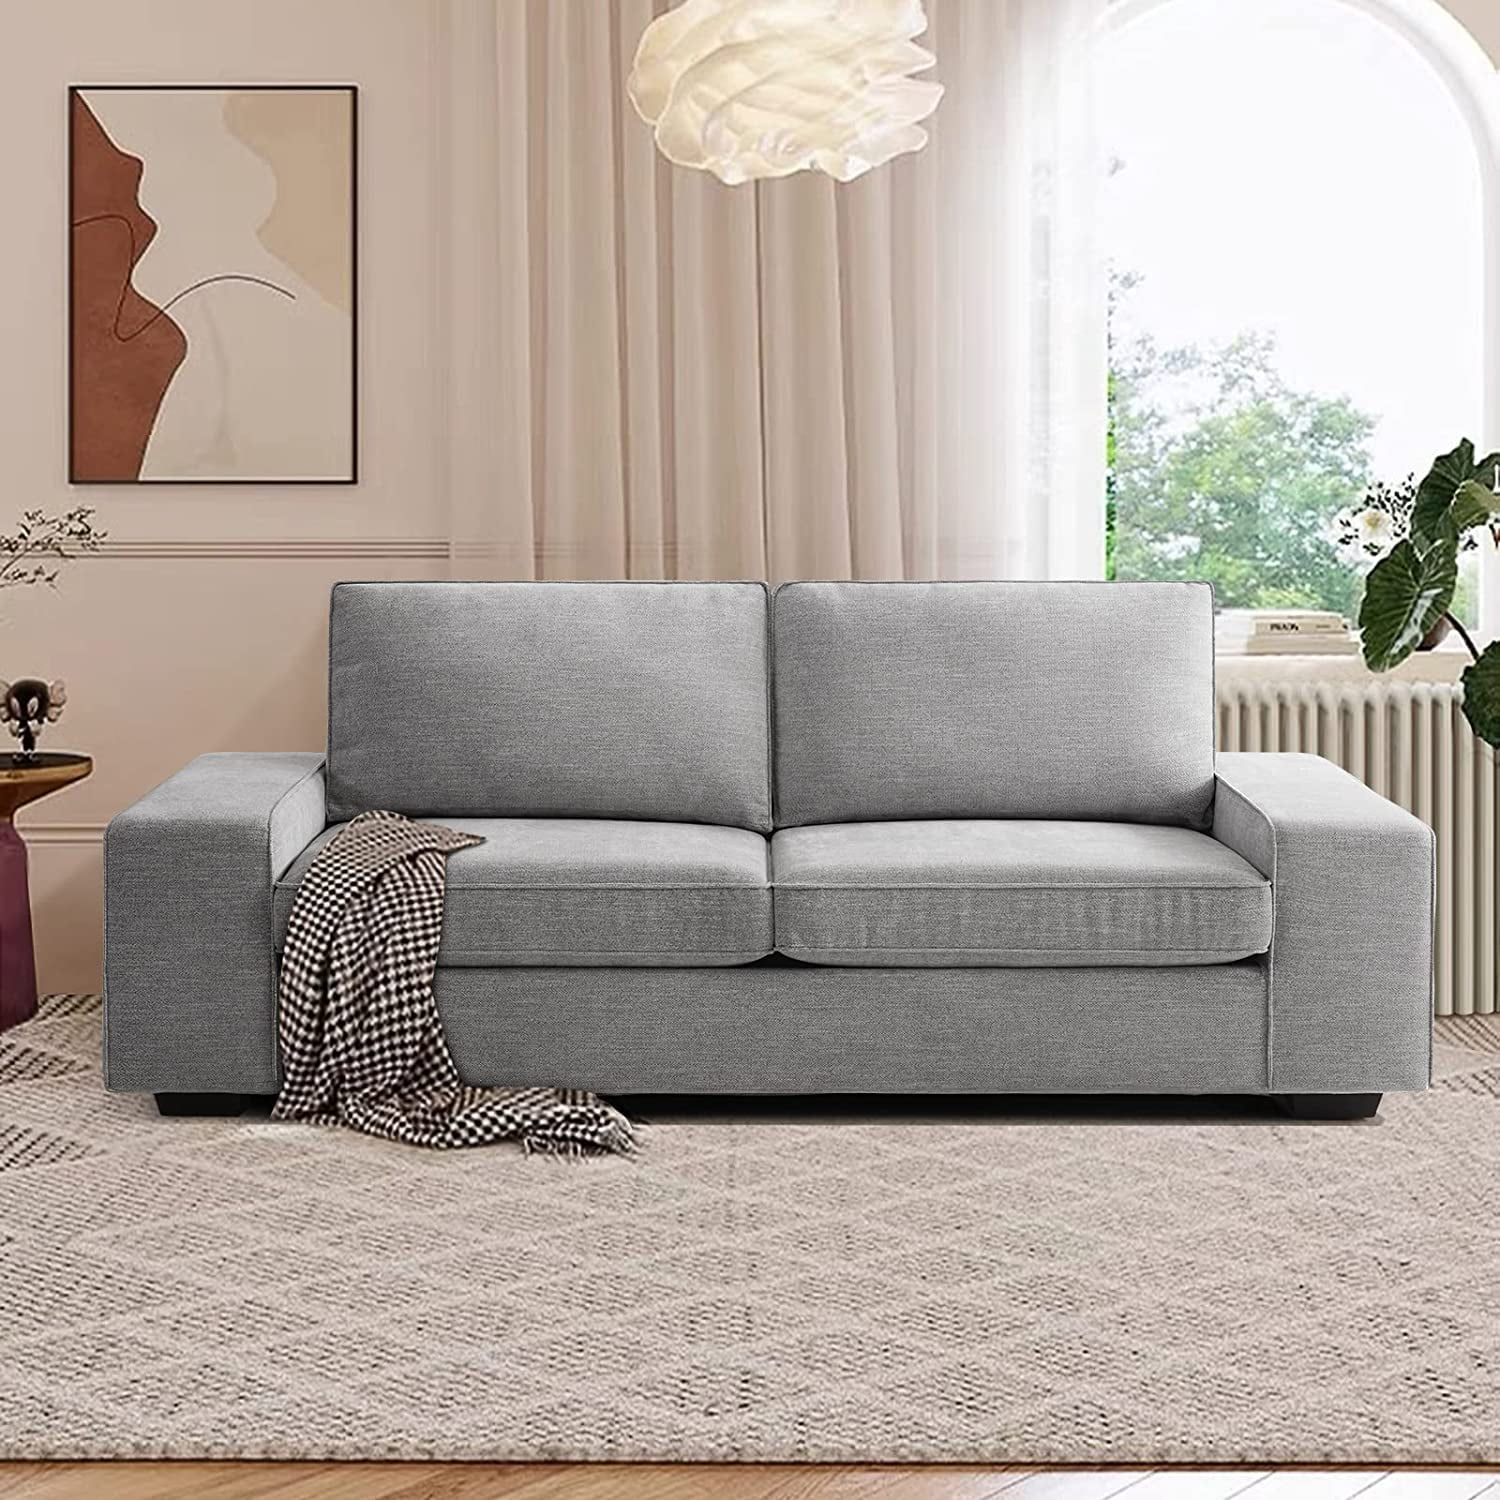 COHOME 88.58 Modern Loveseat Sofas Couches with Solid Wood ,Living Room  Furniture with Armrests, Sofa for Small Spaces, Removable Back Cushion,  Beige Chenille 